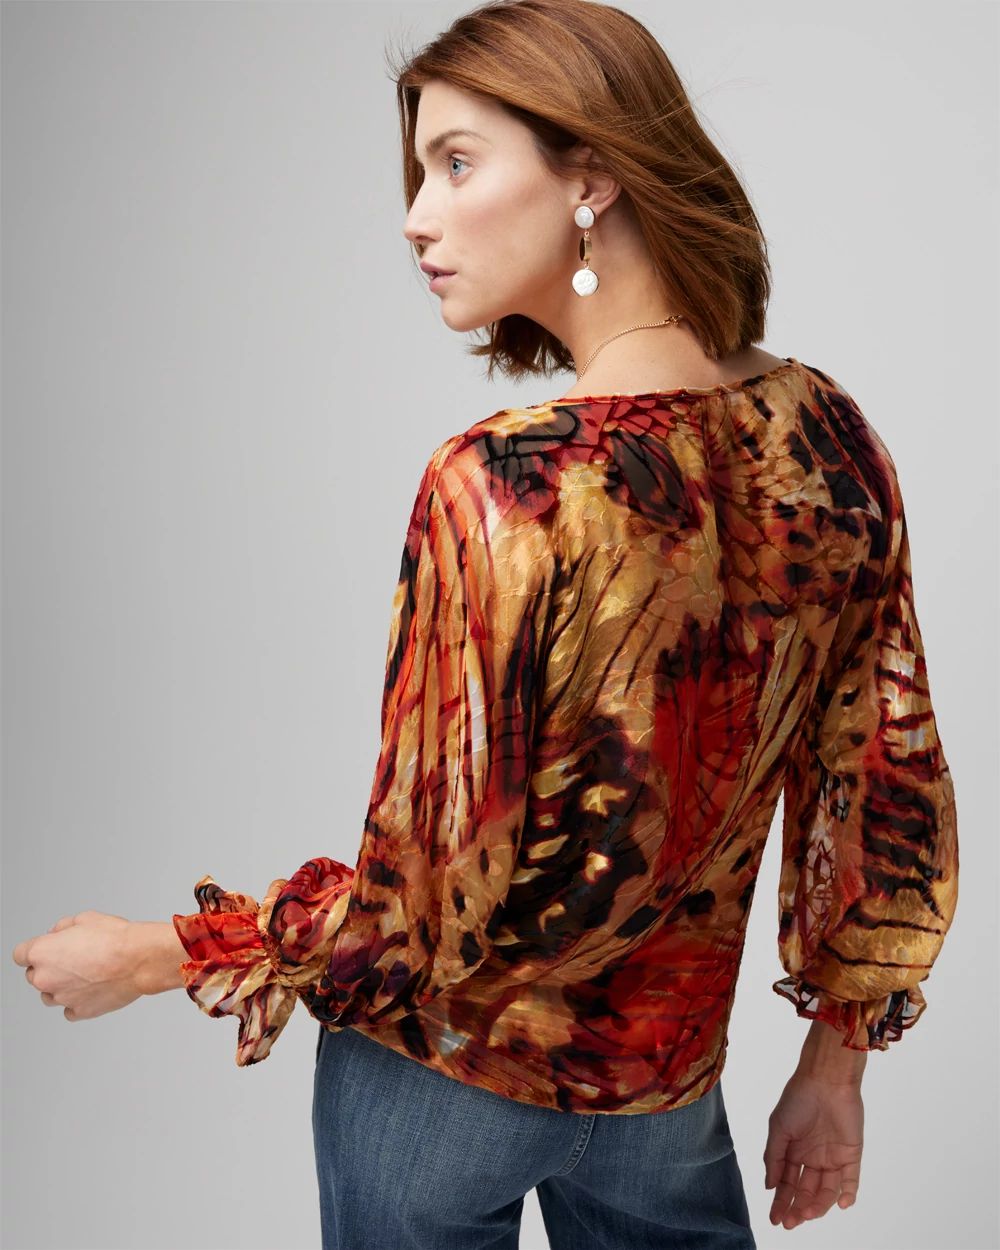 Long-Sleeve Silk Boat Neck Burnout Blouse click to view larger image.